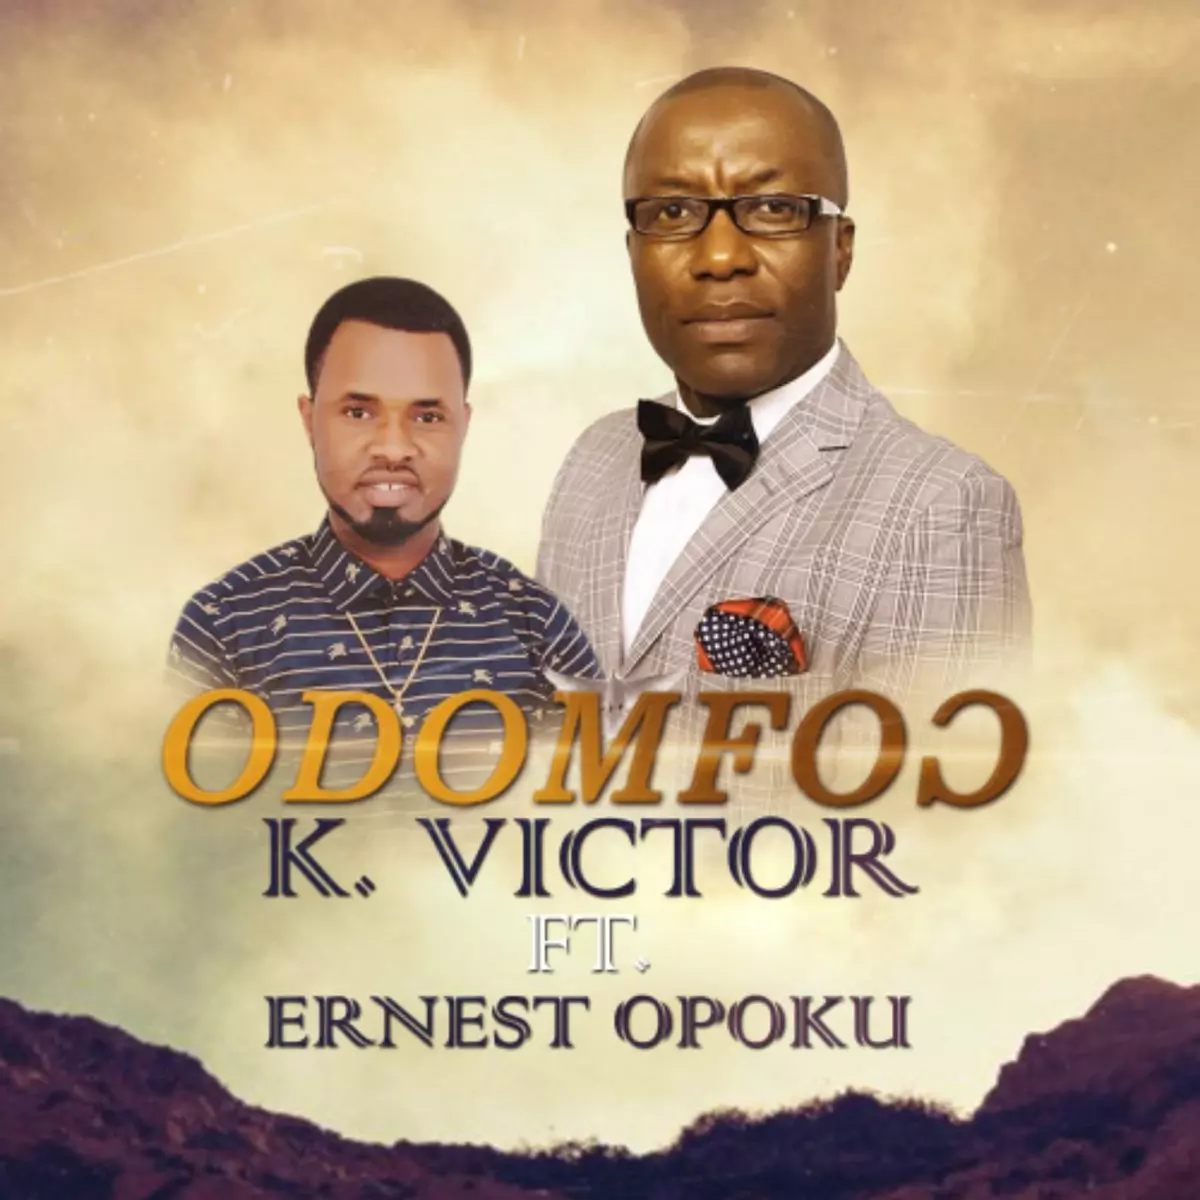 Odomfoc (feat. Ernest Opoku) - EP by K. Victor on Apple Music